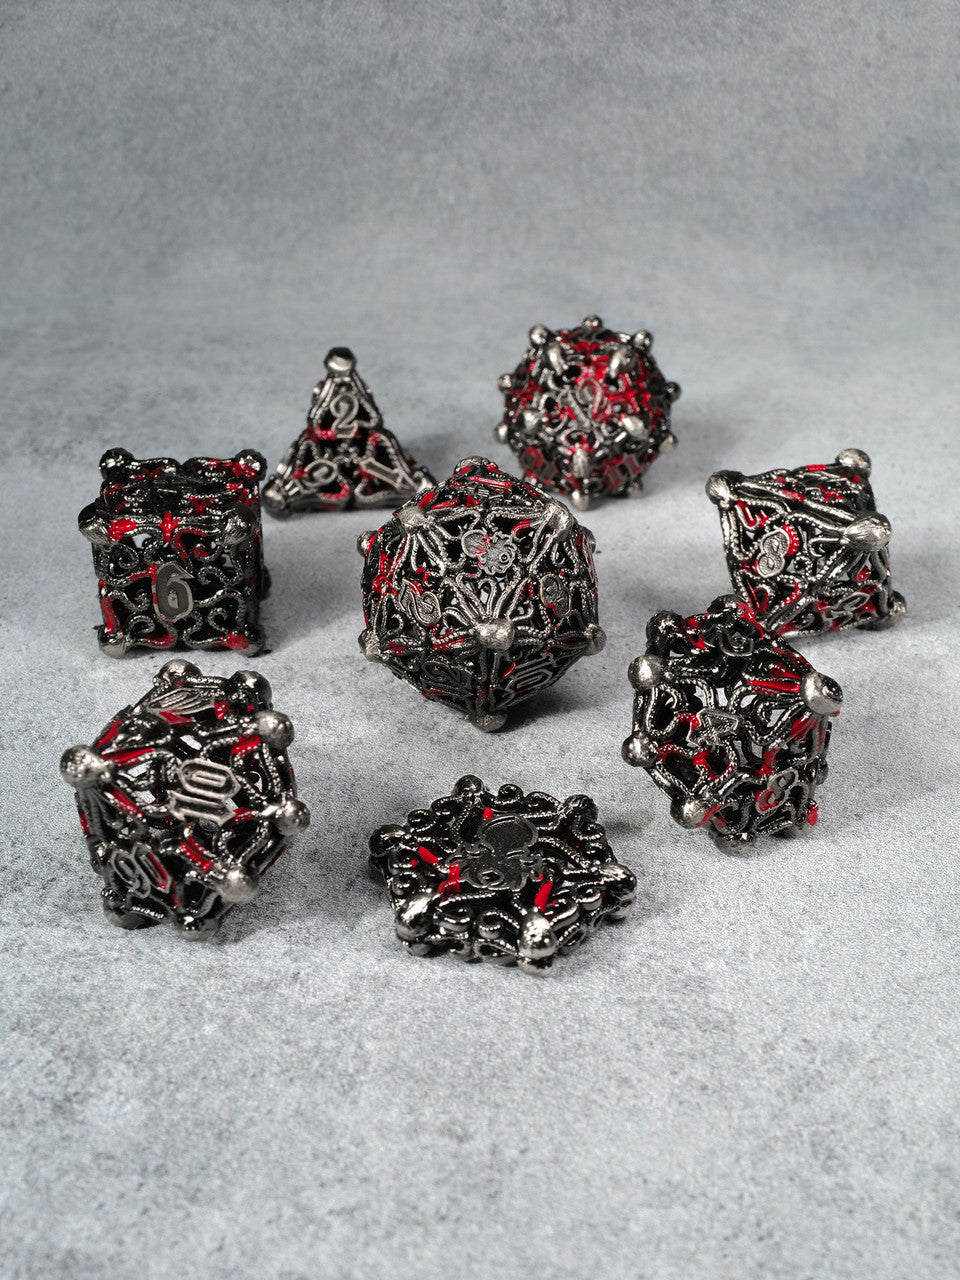 Metal and Stone Dice Vault